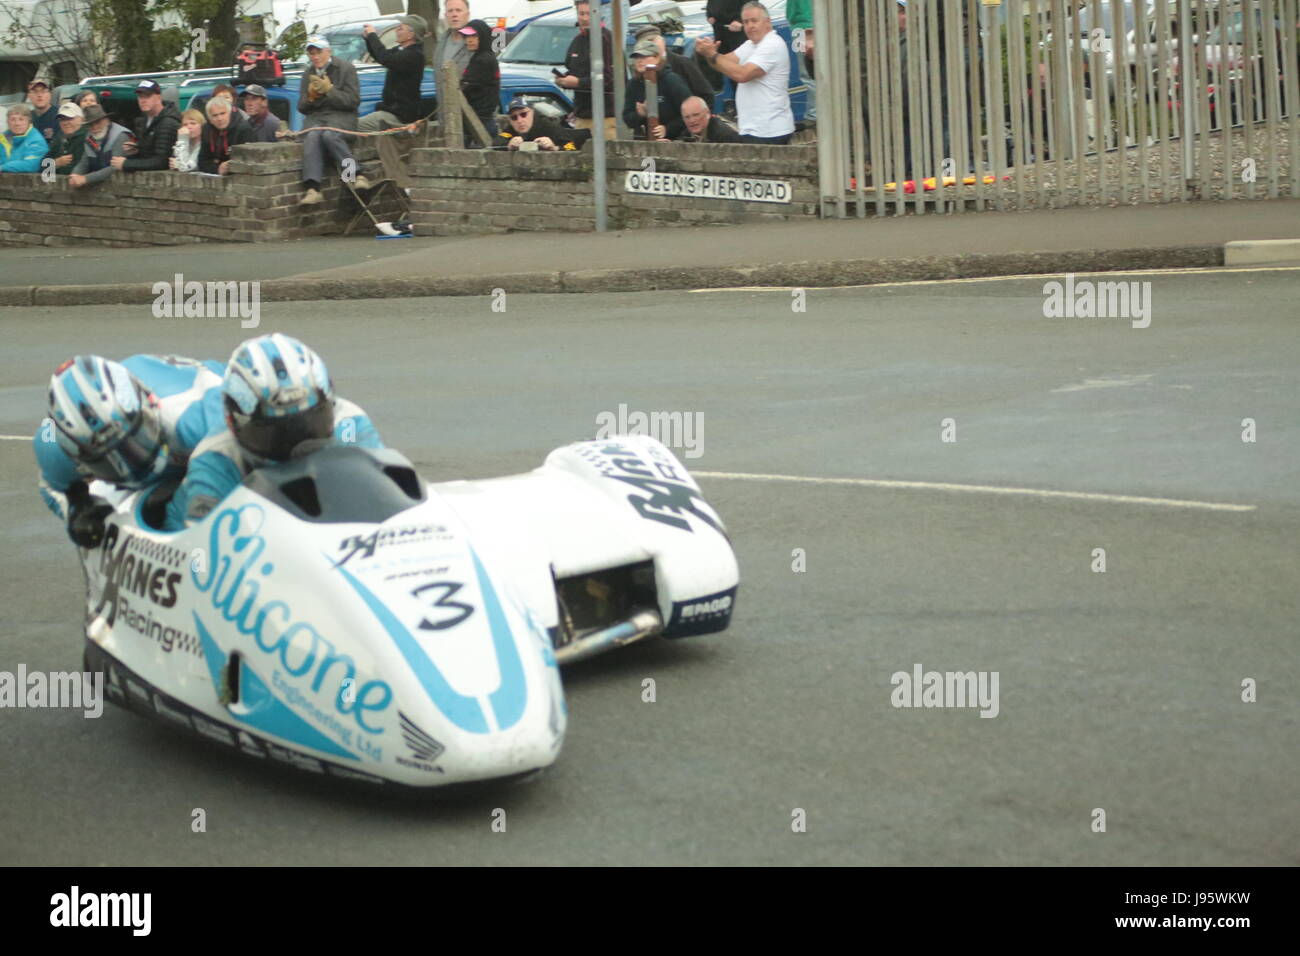 Ramsey, UK. 5th Jun, 2017. Isle of Man TT Races, Sure Sidecar Race. Number 3, John Holden and Lee Cain on a 600cc LCR Honda of the Silicone Engineering/ Barnes Racing team from Mellor Brook, UK, at Cruickshanks Corner, Ramsey, Isle of Man. Credit: Louisa Jane Bawden/Alamy Live News. Stock Photo